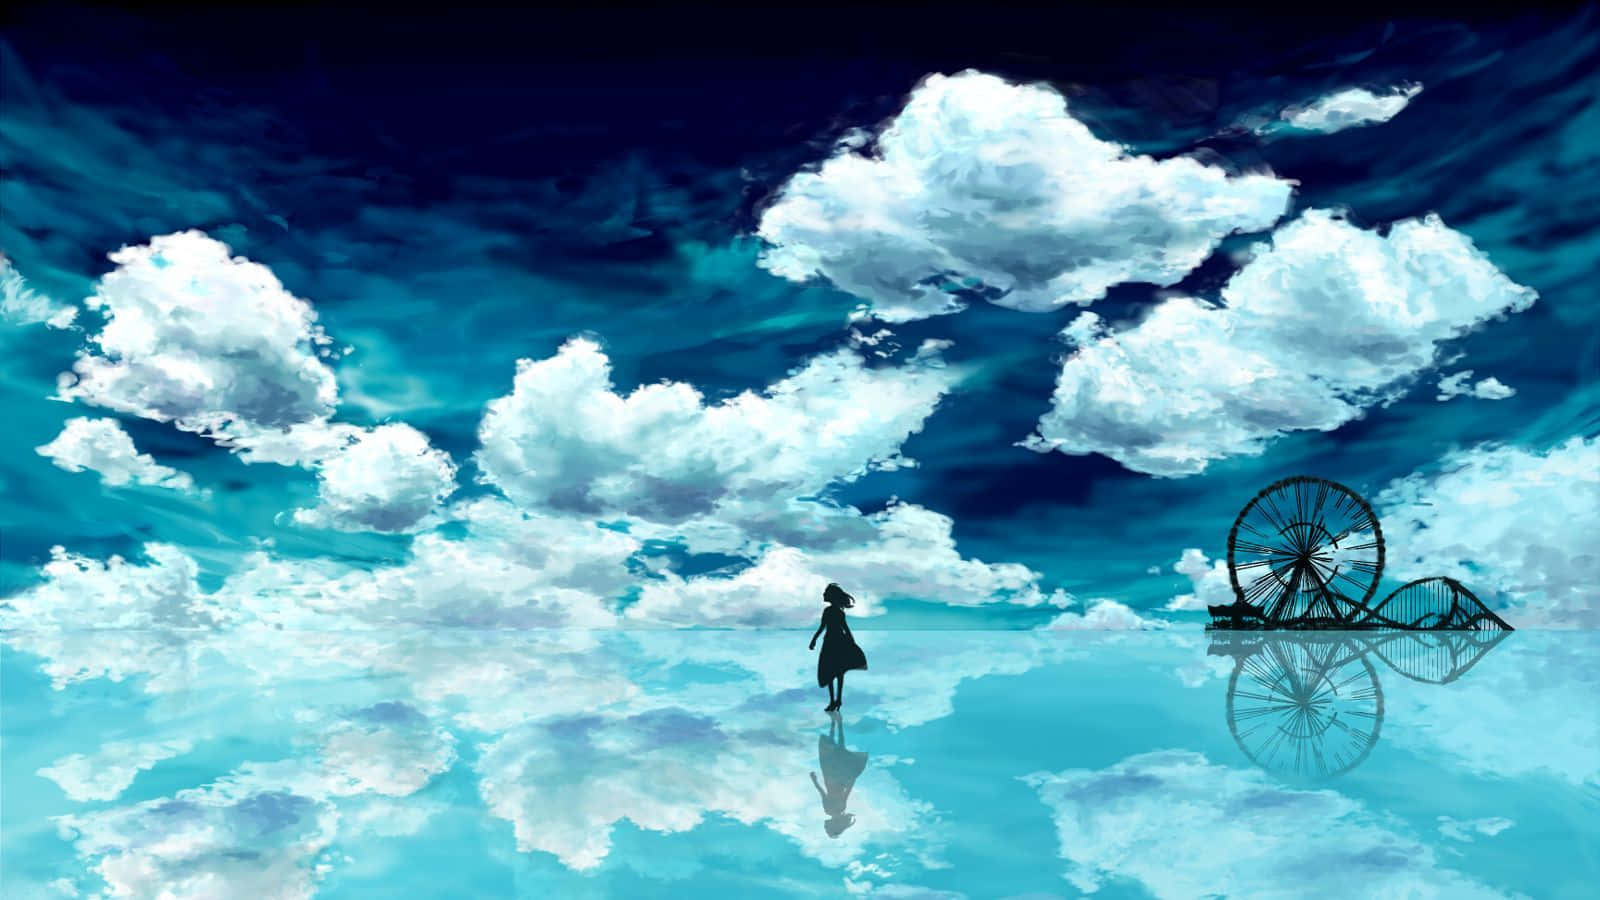 a girl is walking on a water surface with clouds and a ferris wheel